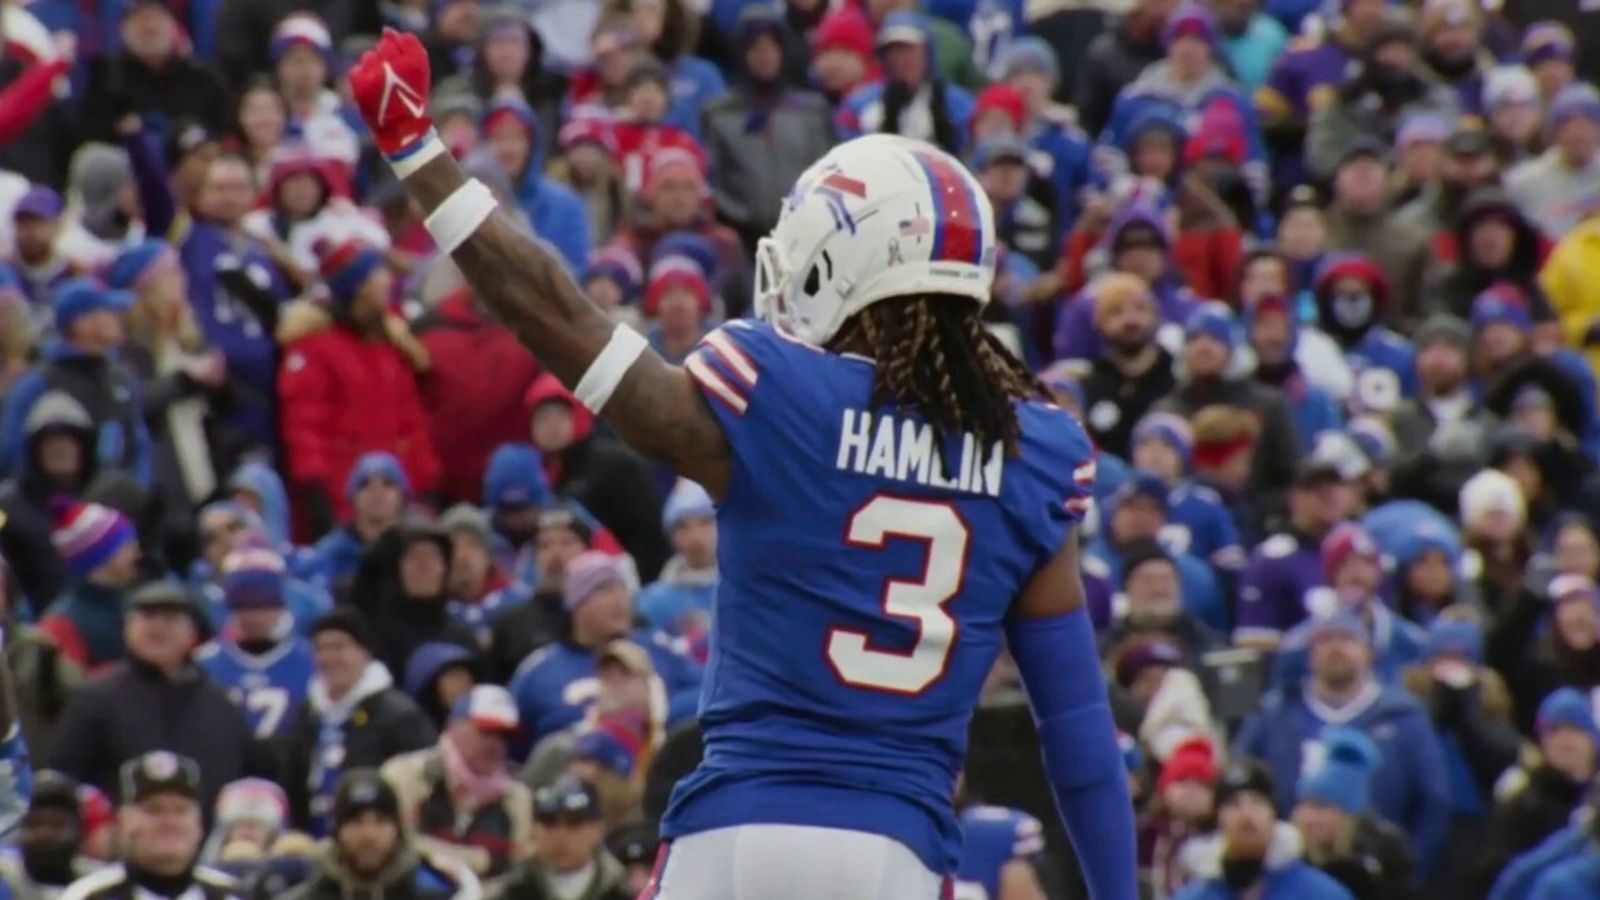 Damar Hamlin: American football player who suffered cardiac arrest mid-game is released from hospital